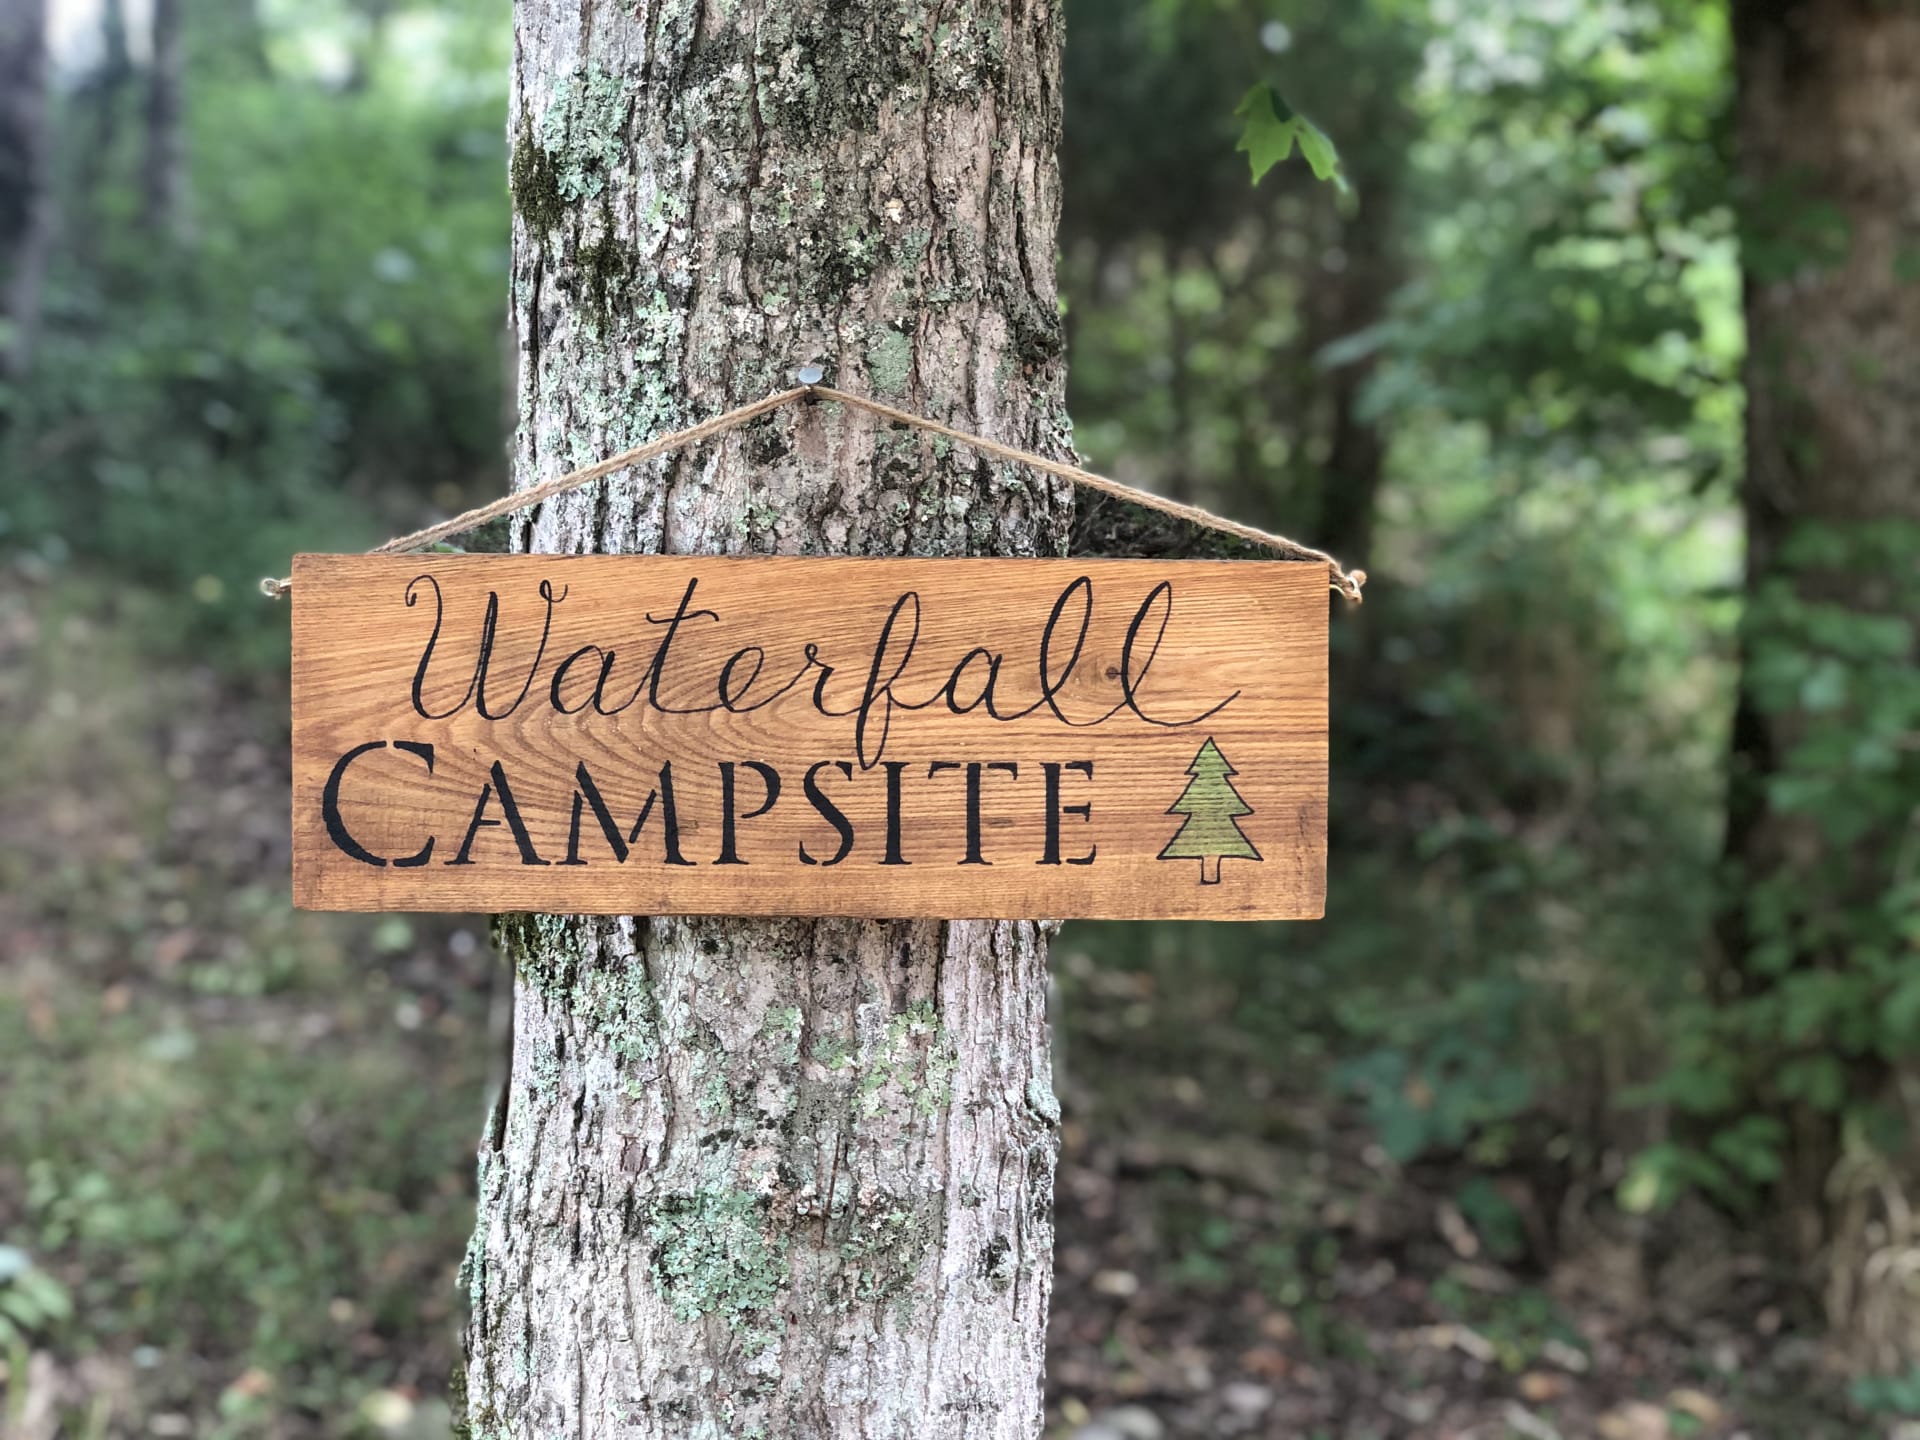 Waterfall Campsite is a great place to make wonderful memories!